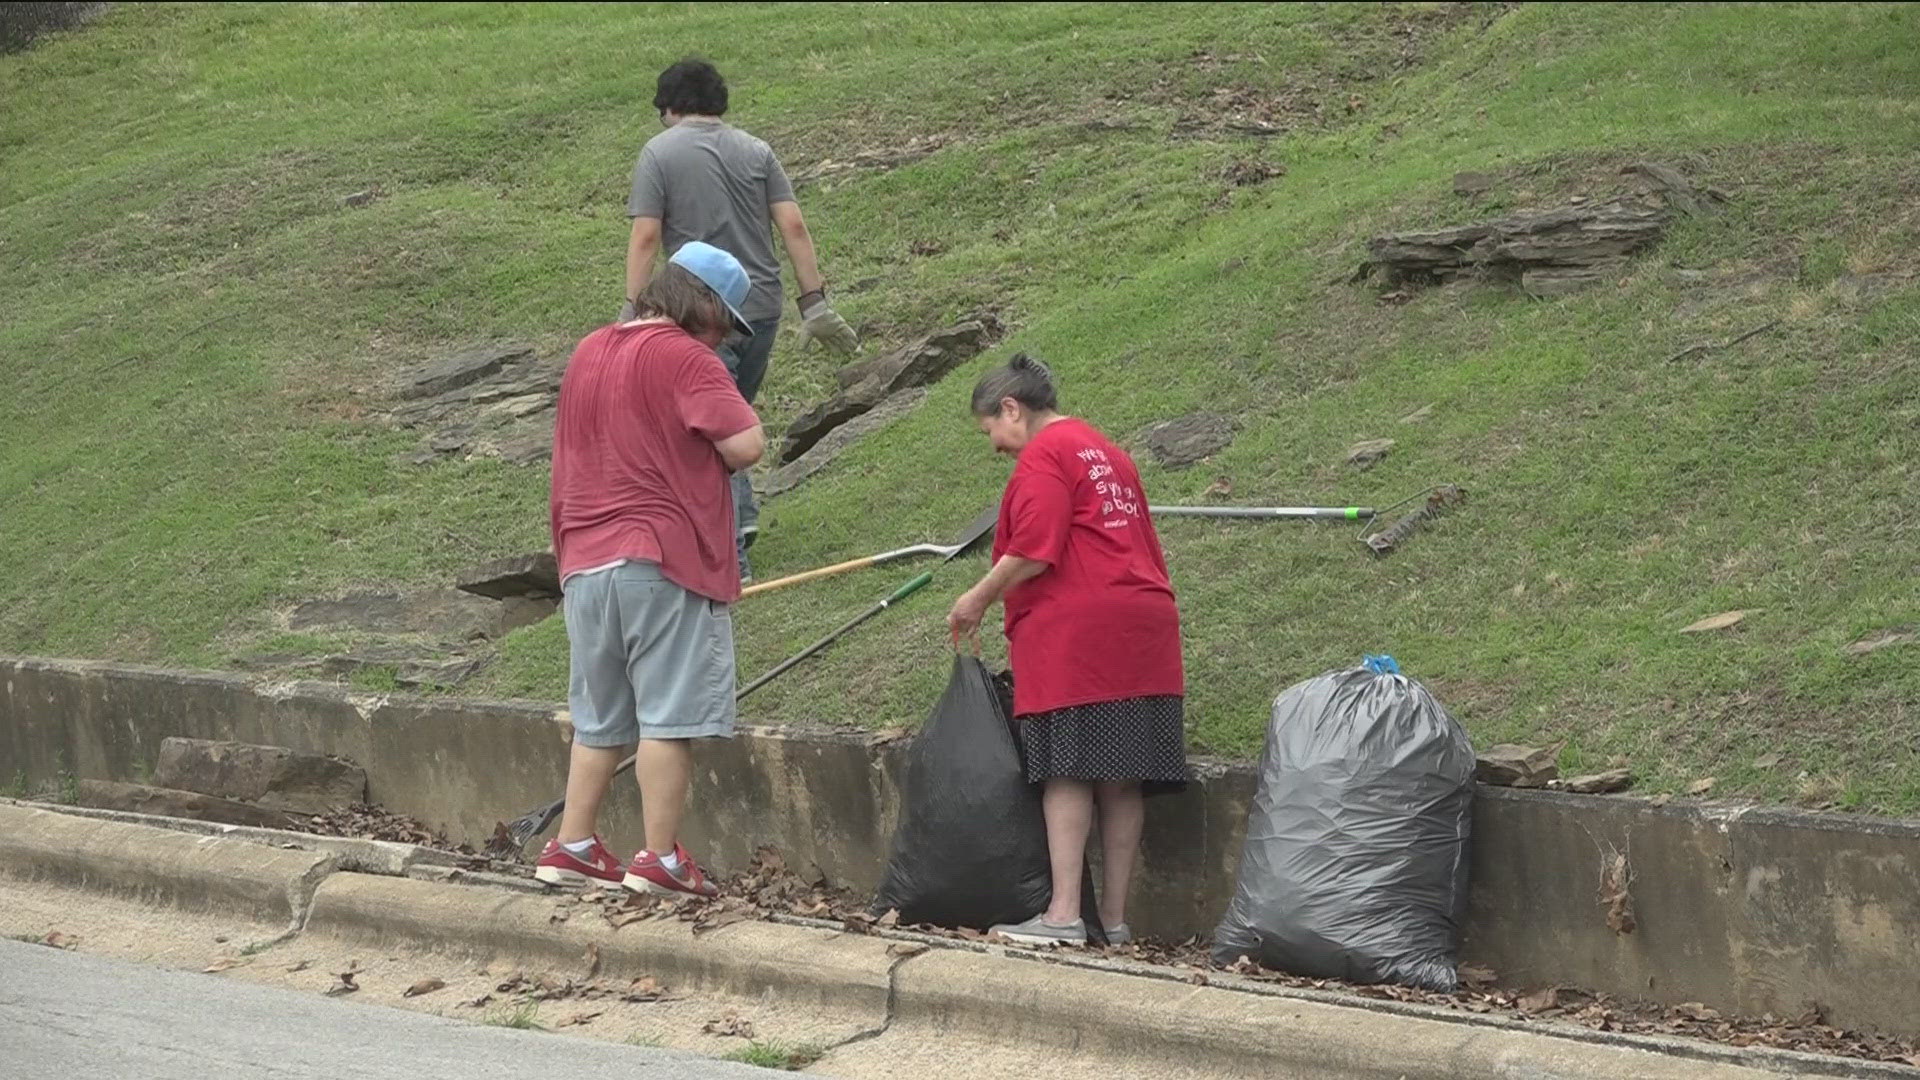 Volunteers participated in a community-wide clean up of what will soon be the Black Historic District in Fayetteville.